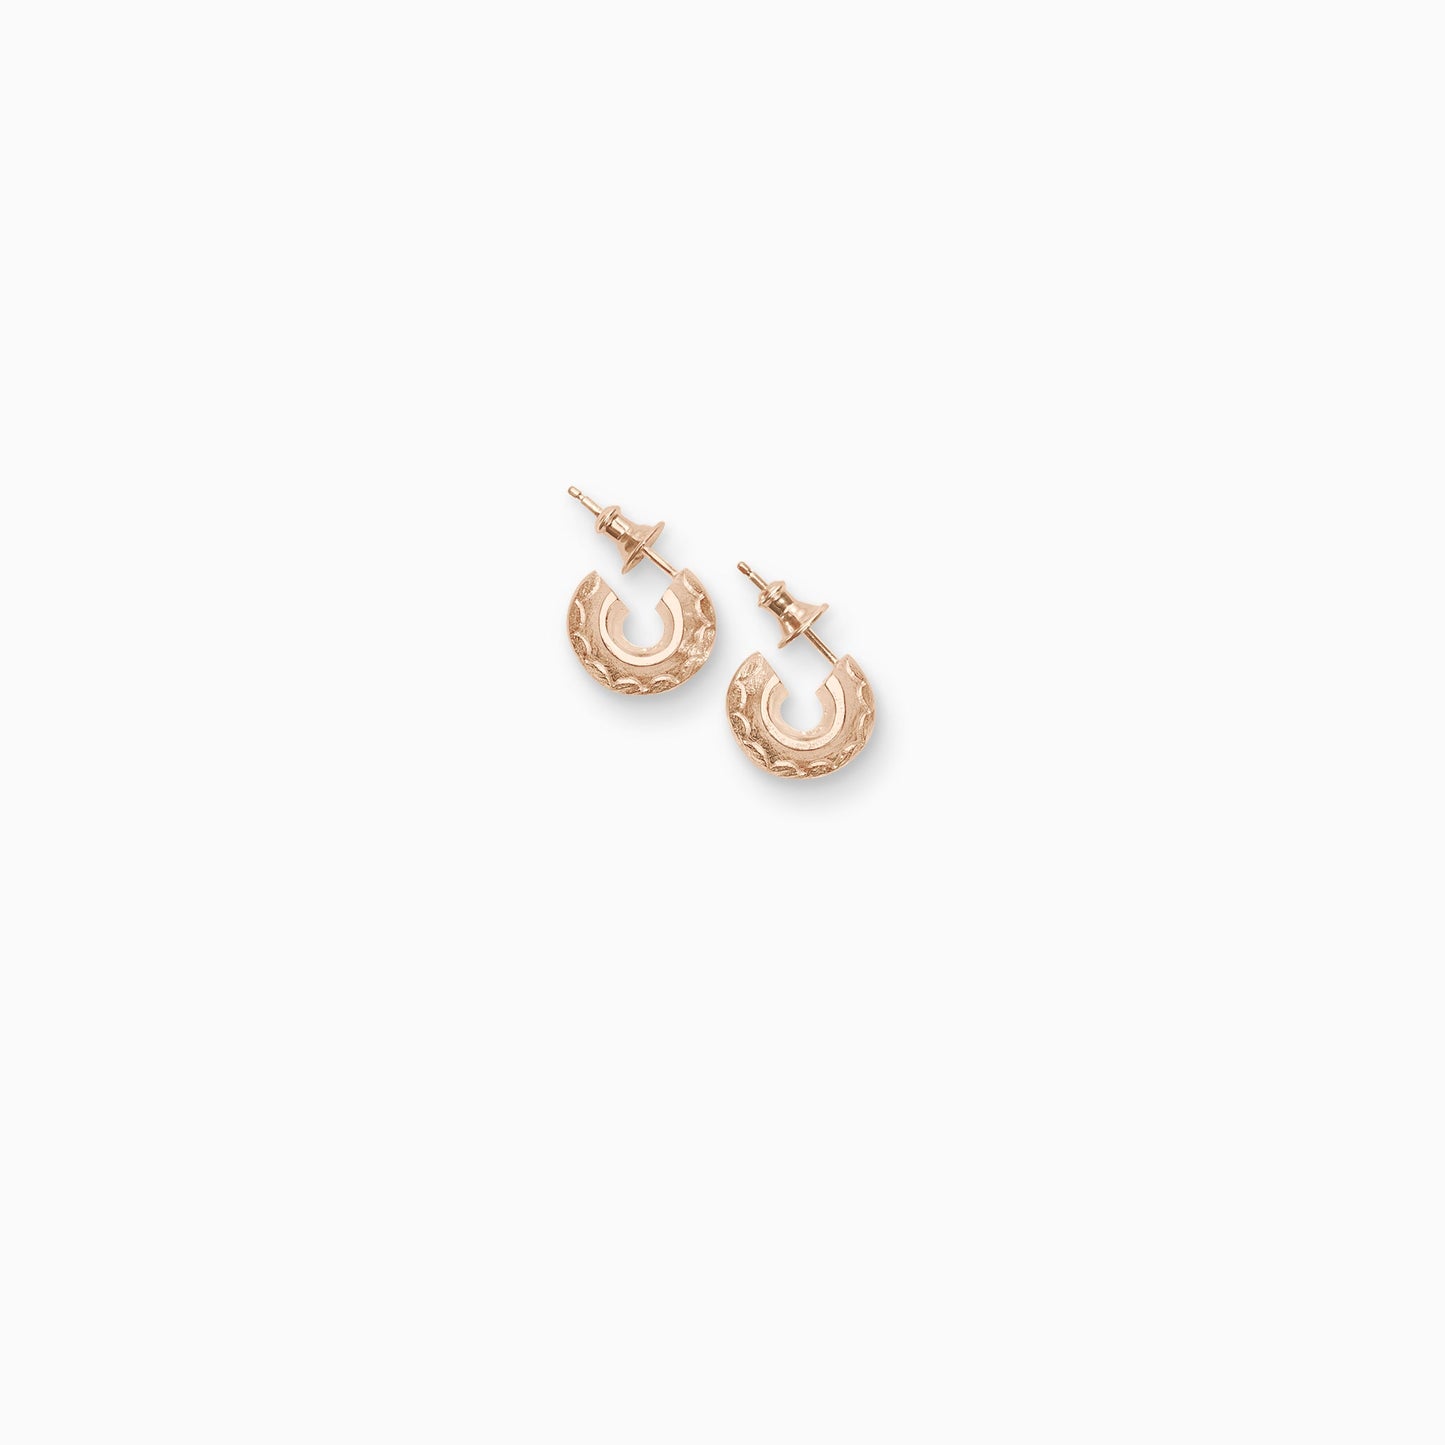 A pair of 18ct Fairtrade rose gold  round hoop earrings with a stud fastening. Sitting snug to the ear with a scalloped pattern engraved around the outer edge. 14mm outside diameter.